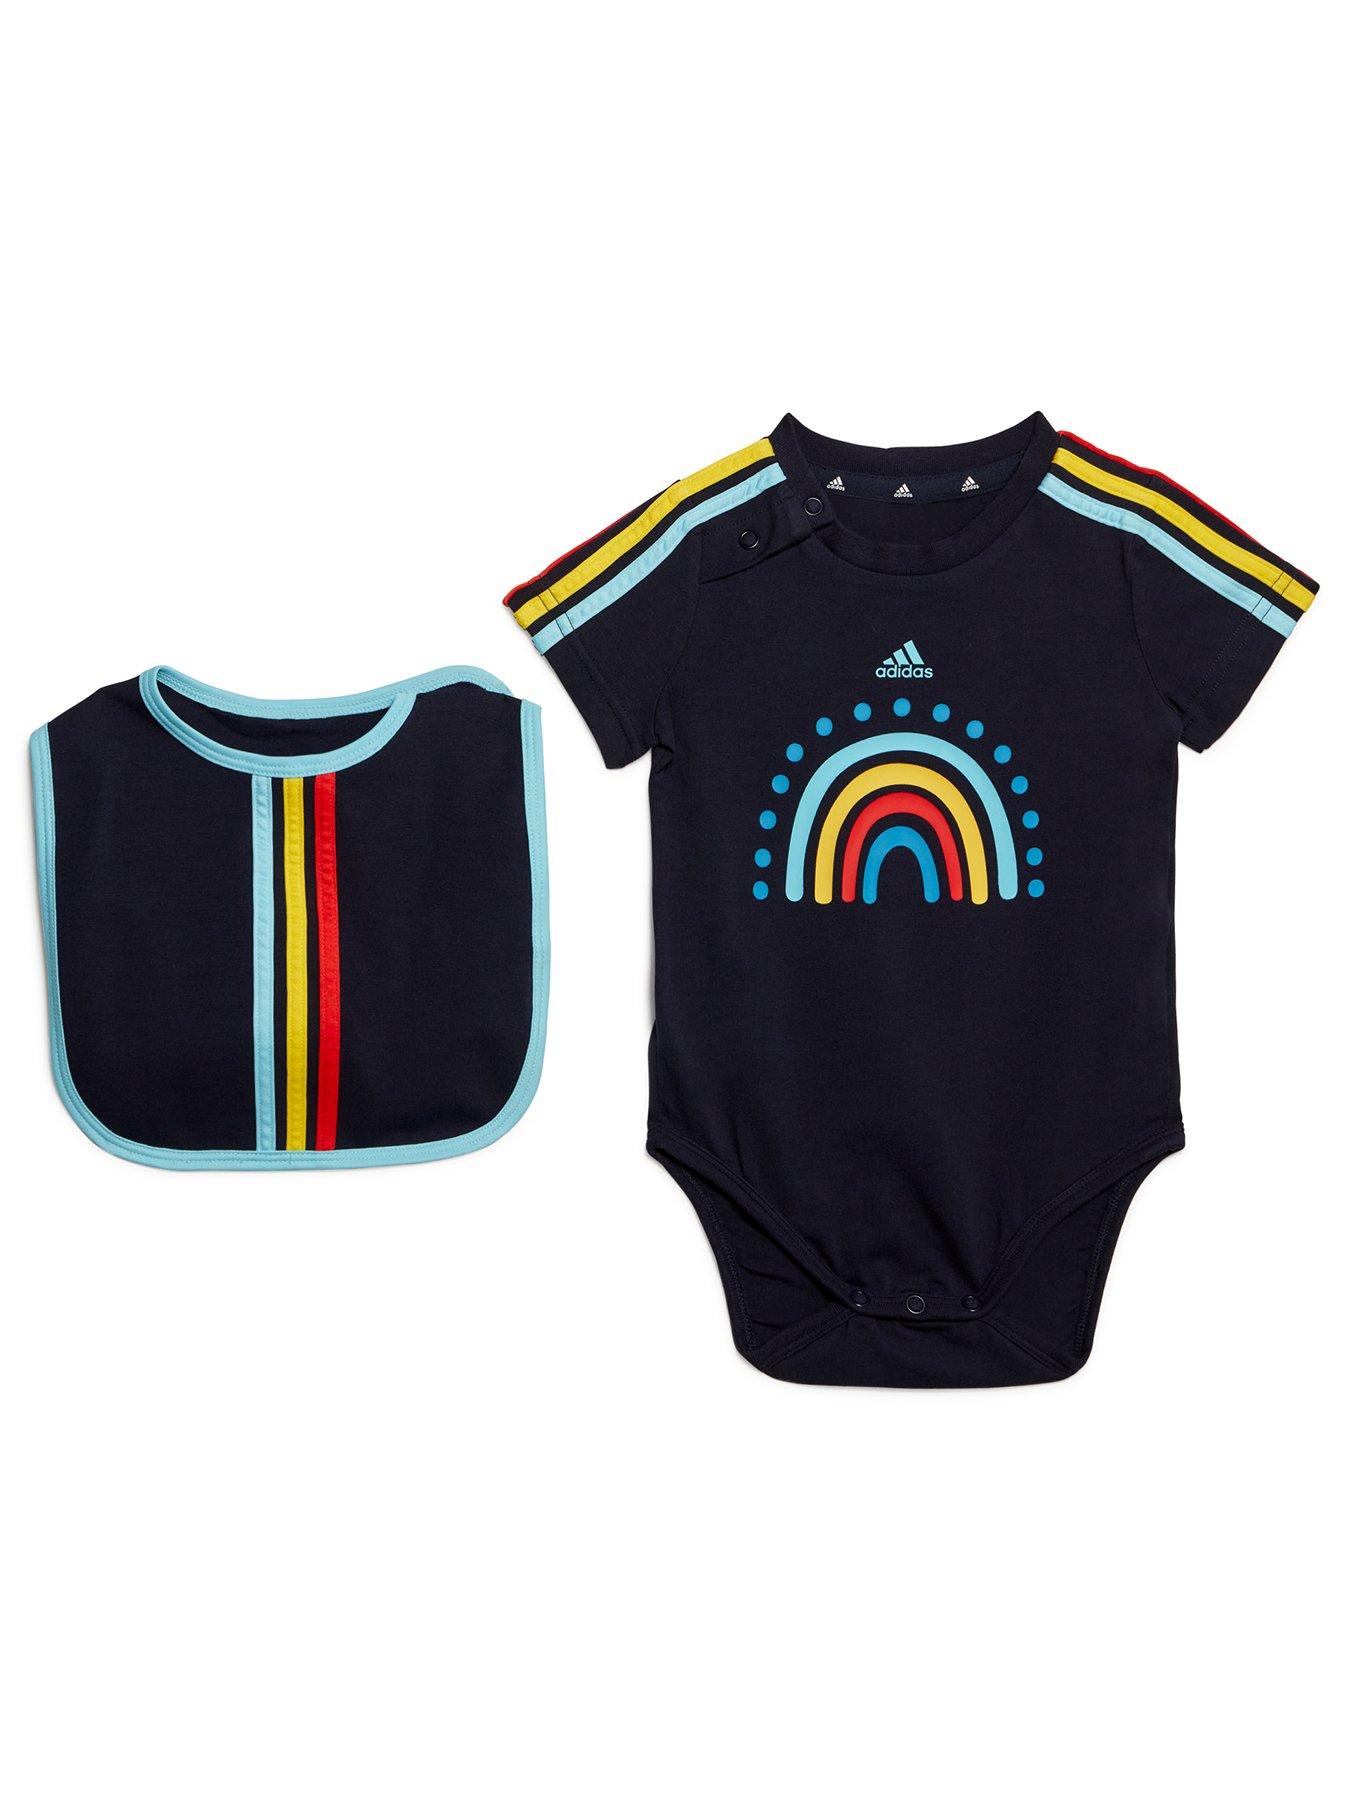 Gifts Gift Ideas Babies | Very.co.uk